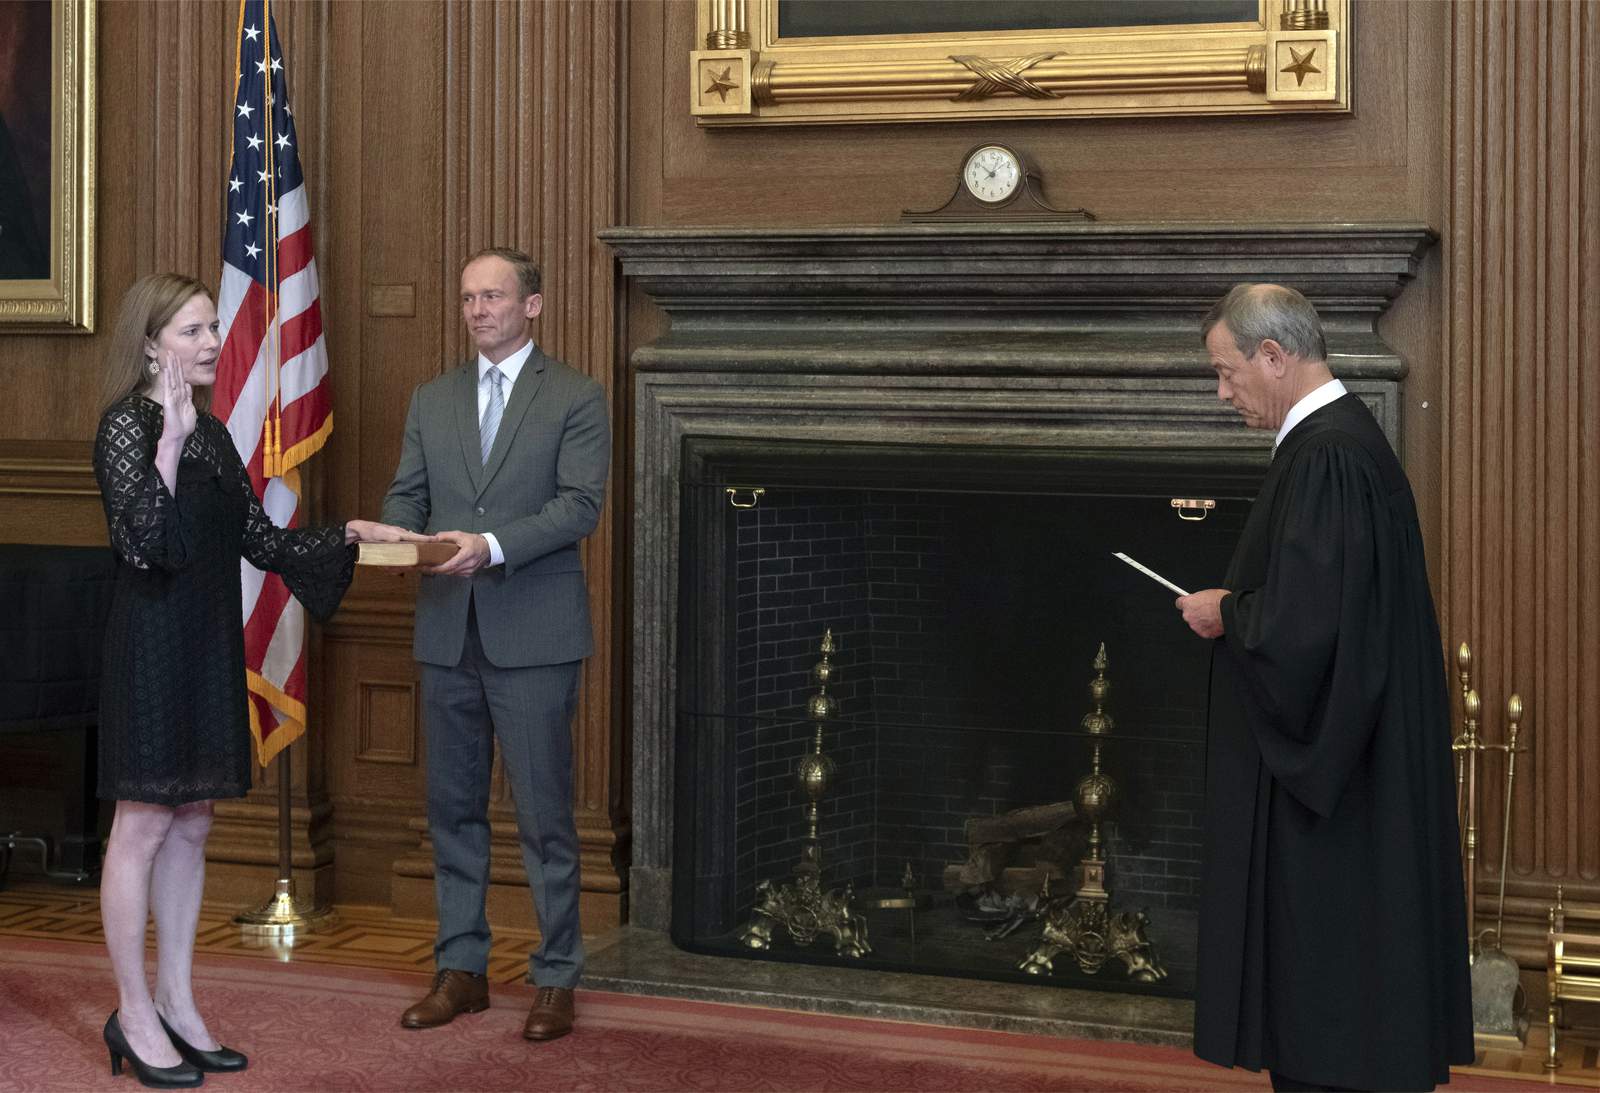 Barrett sworn in at court as issues important to Trump await